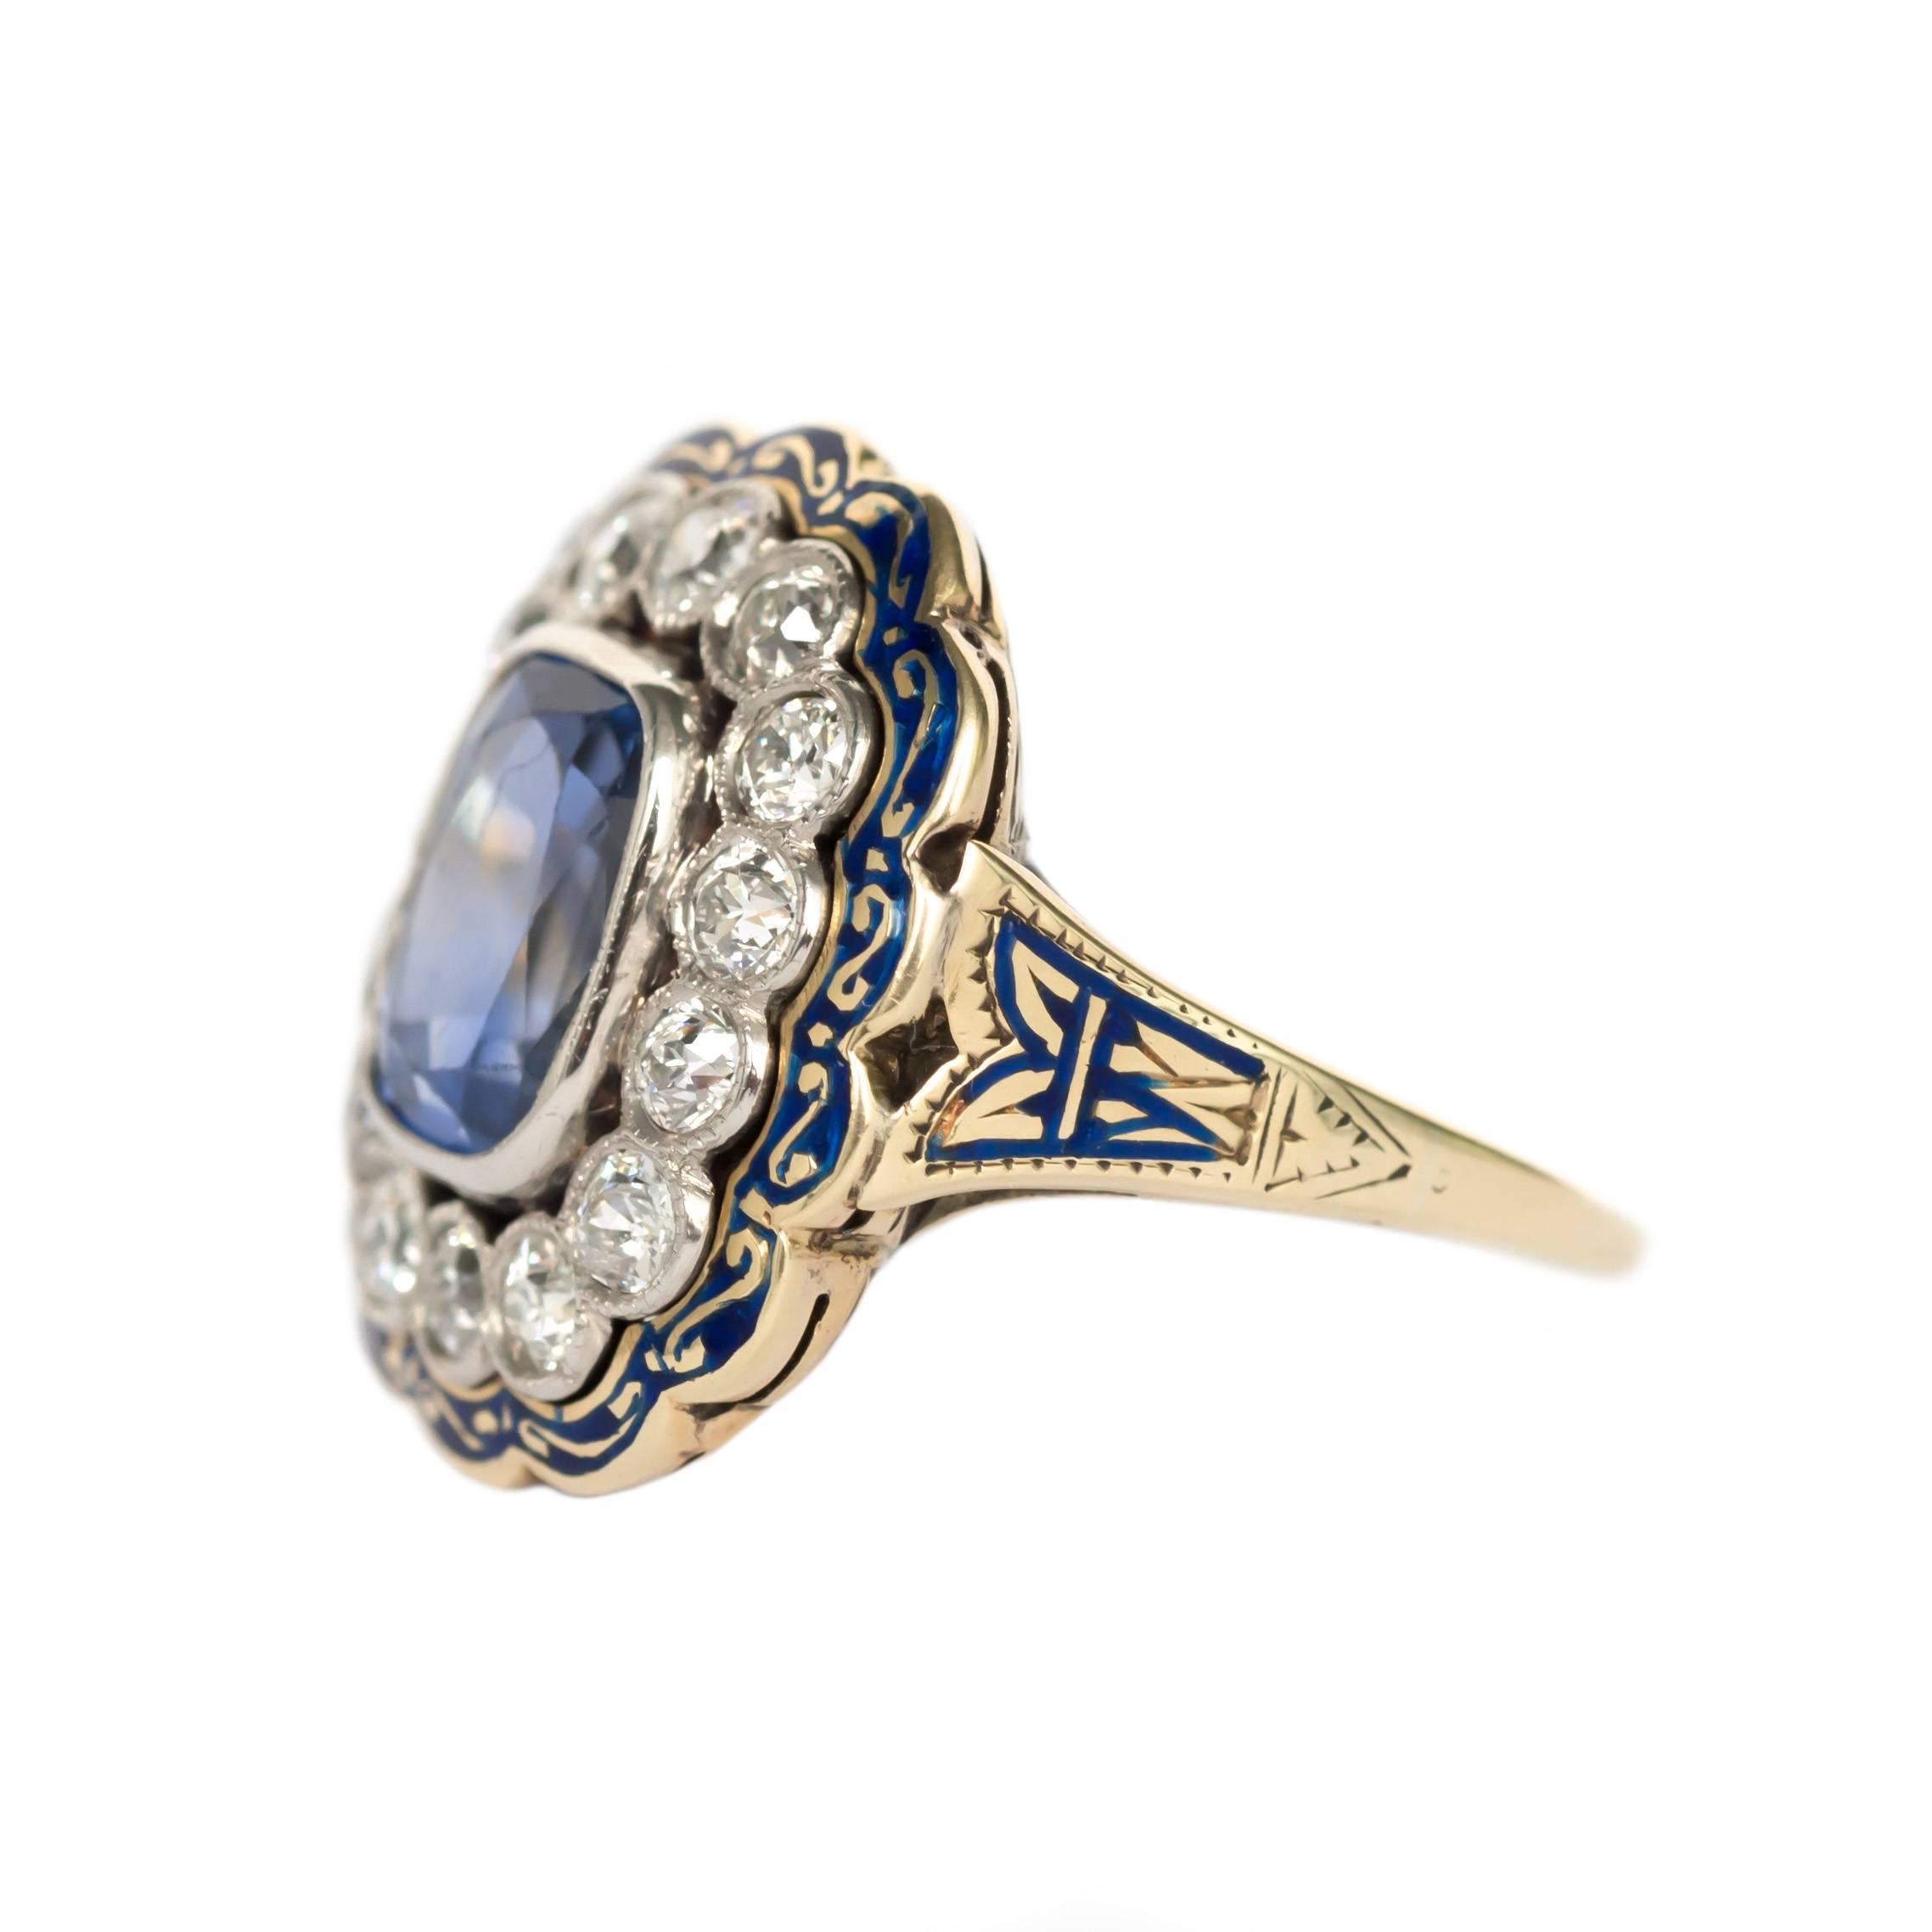 Item Details: 
Ring Size: 6.90
Metal Type: 14 Karat Yellow Gold 
Weight: 7.6 grams

GIA CERTIFIED Center Stones - Certificate # 5191270907
Color Stone Details: 
Type: Sapphire
Shape: Cushion
Carat Weight: Approximately 2.90 carat 
Color: Blue

Side